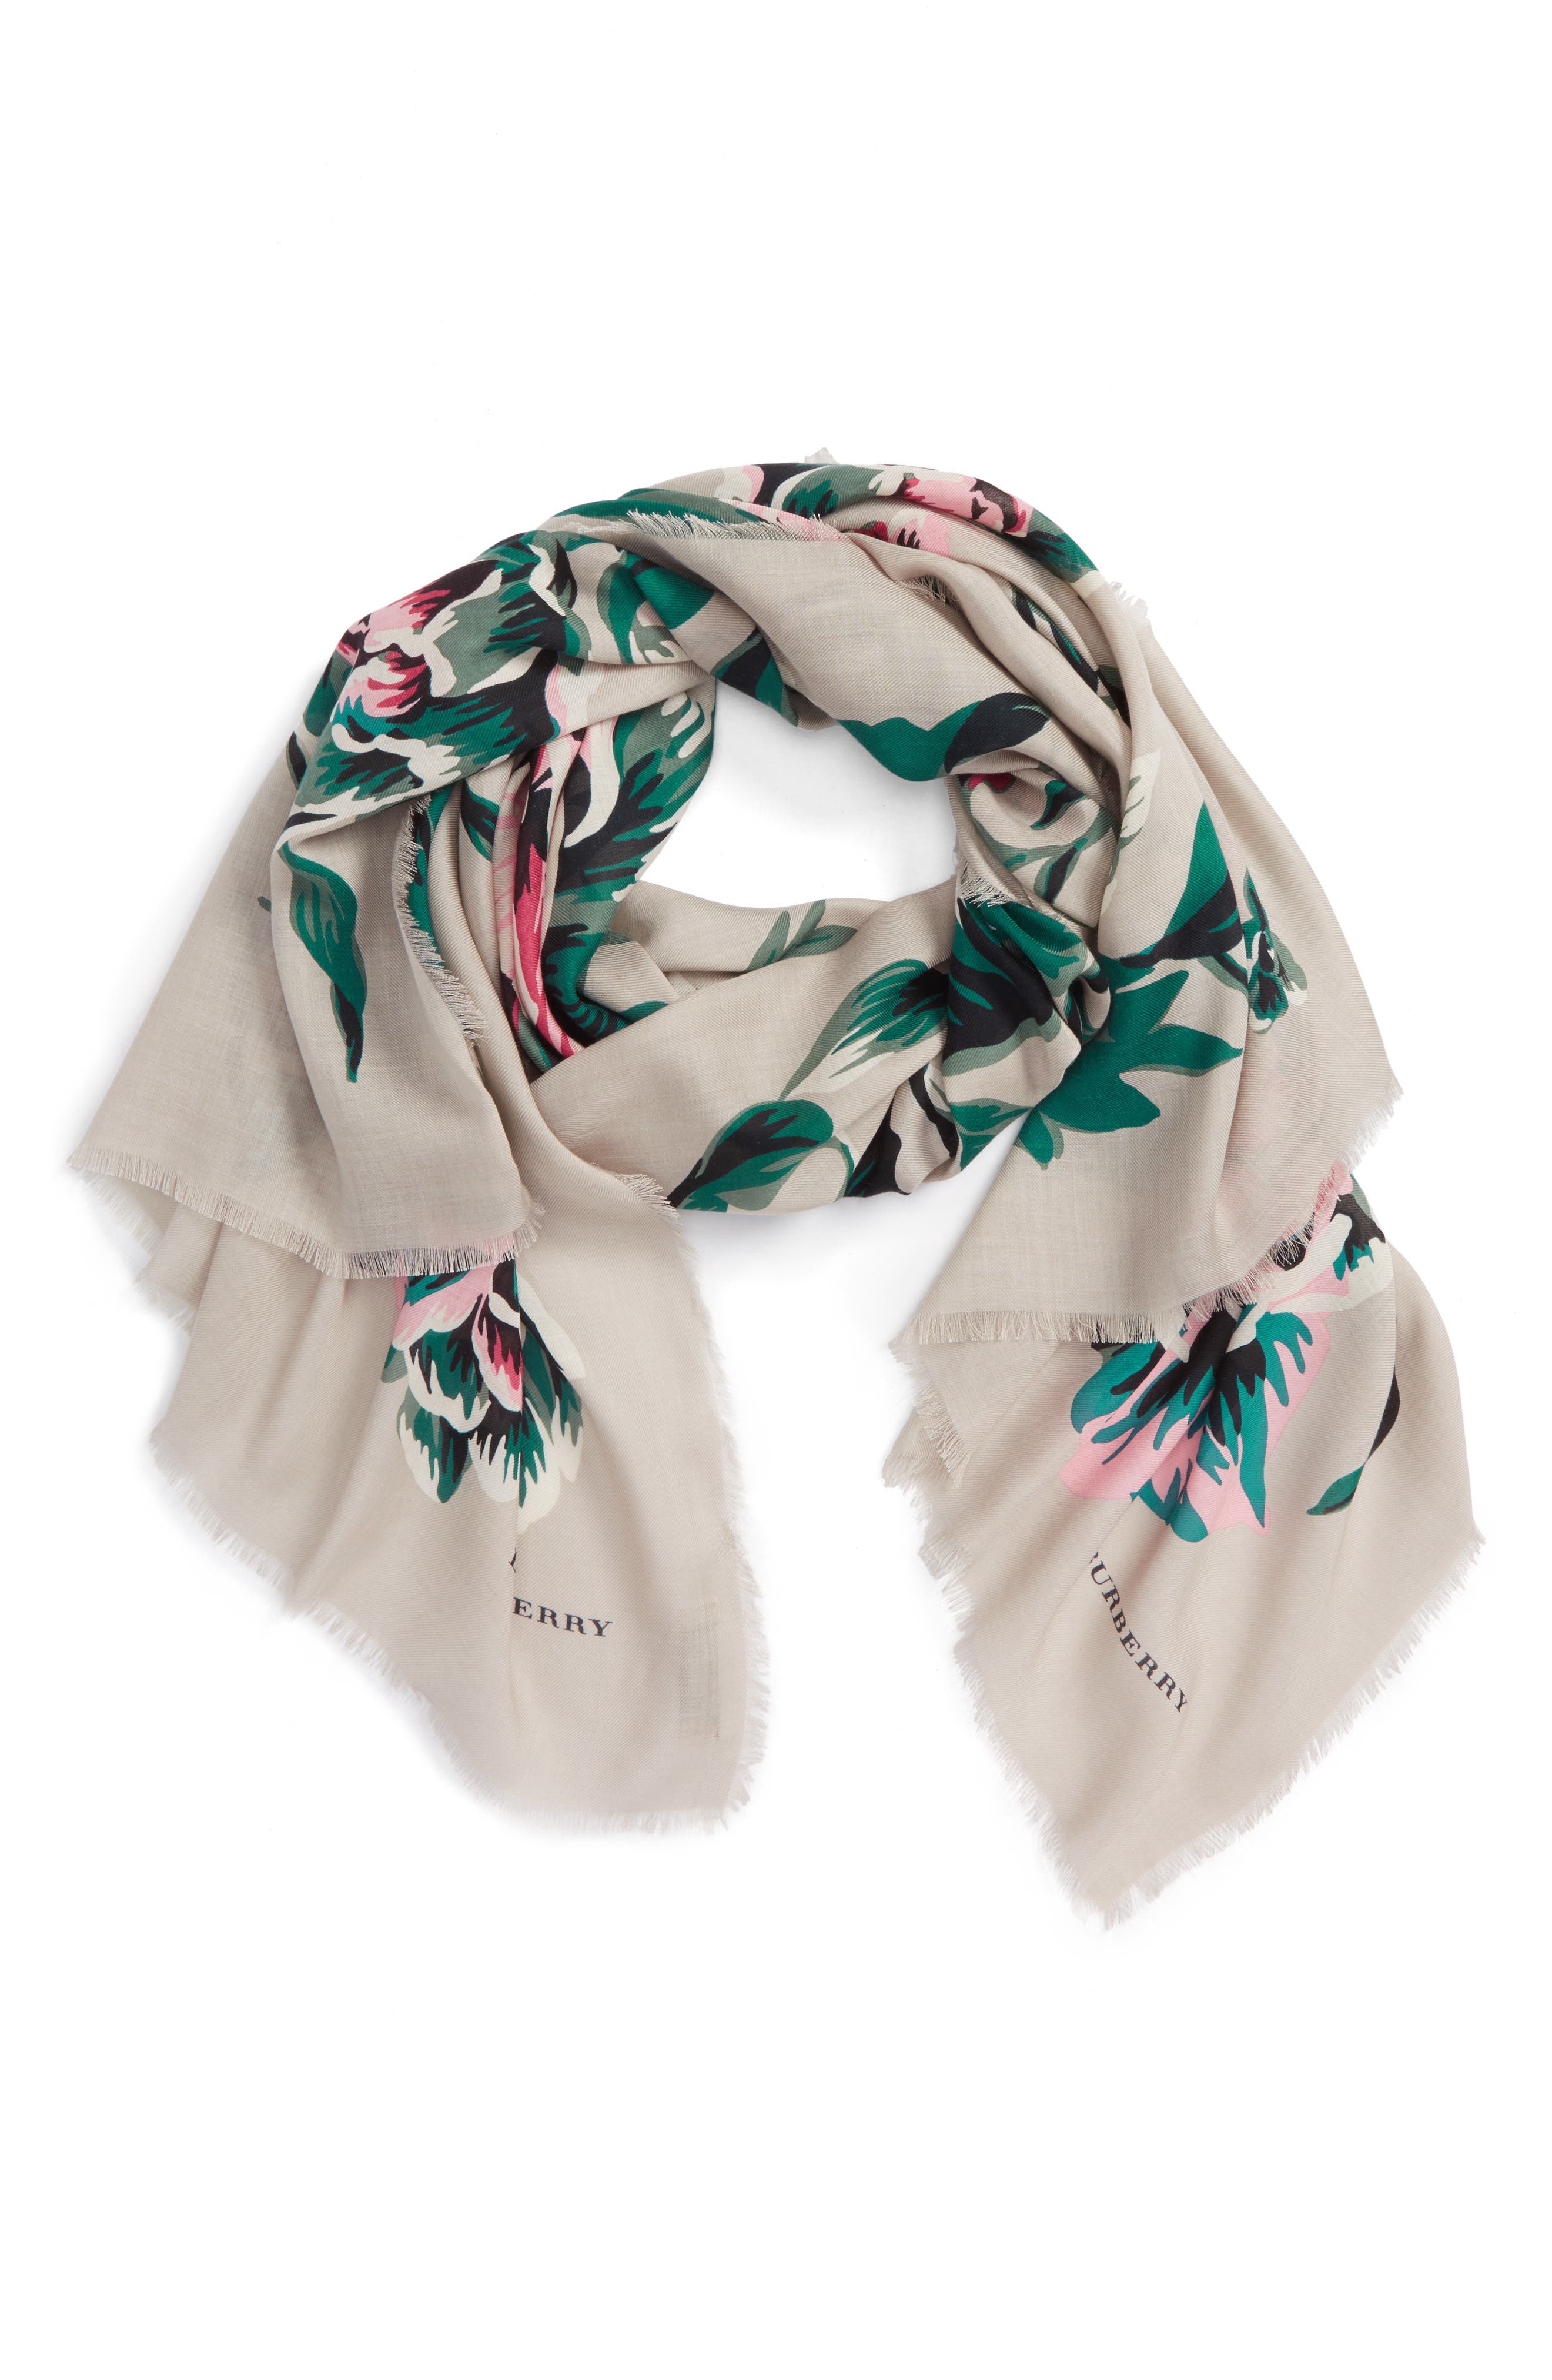 Burberry Floral Print Scarf | Nordstrom